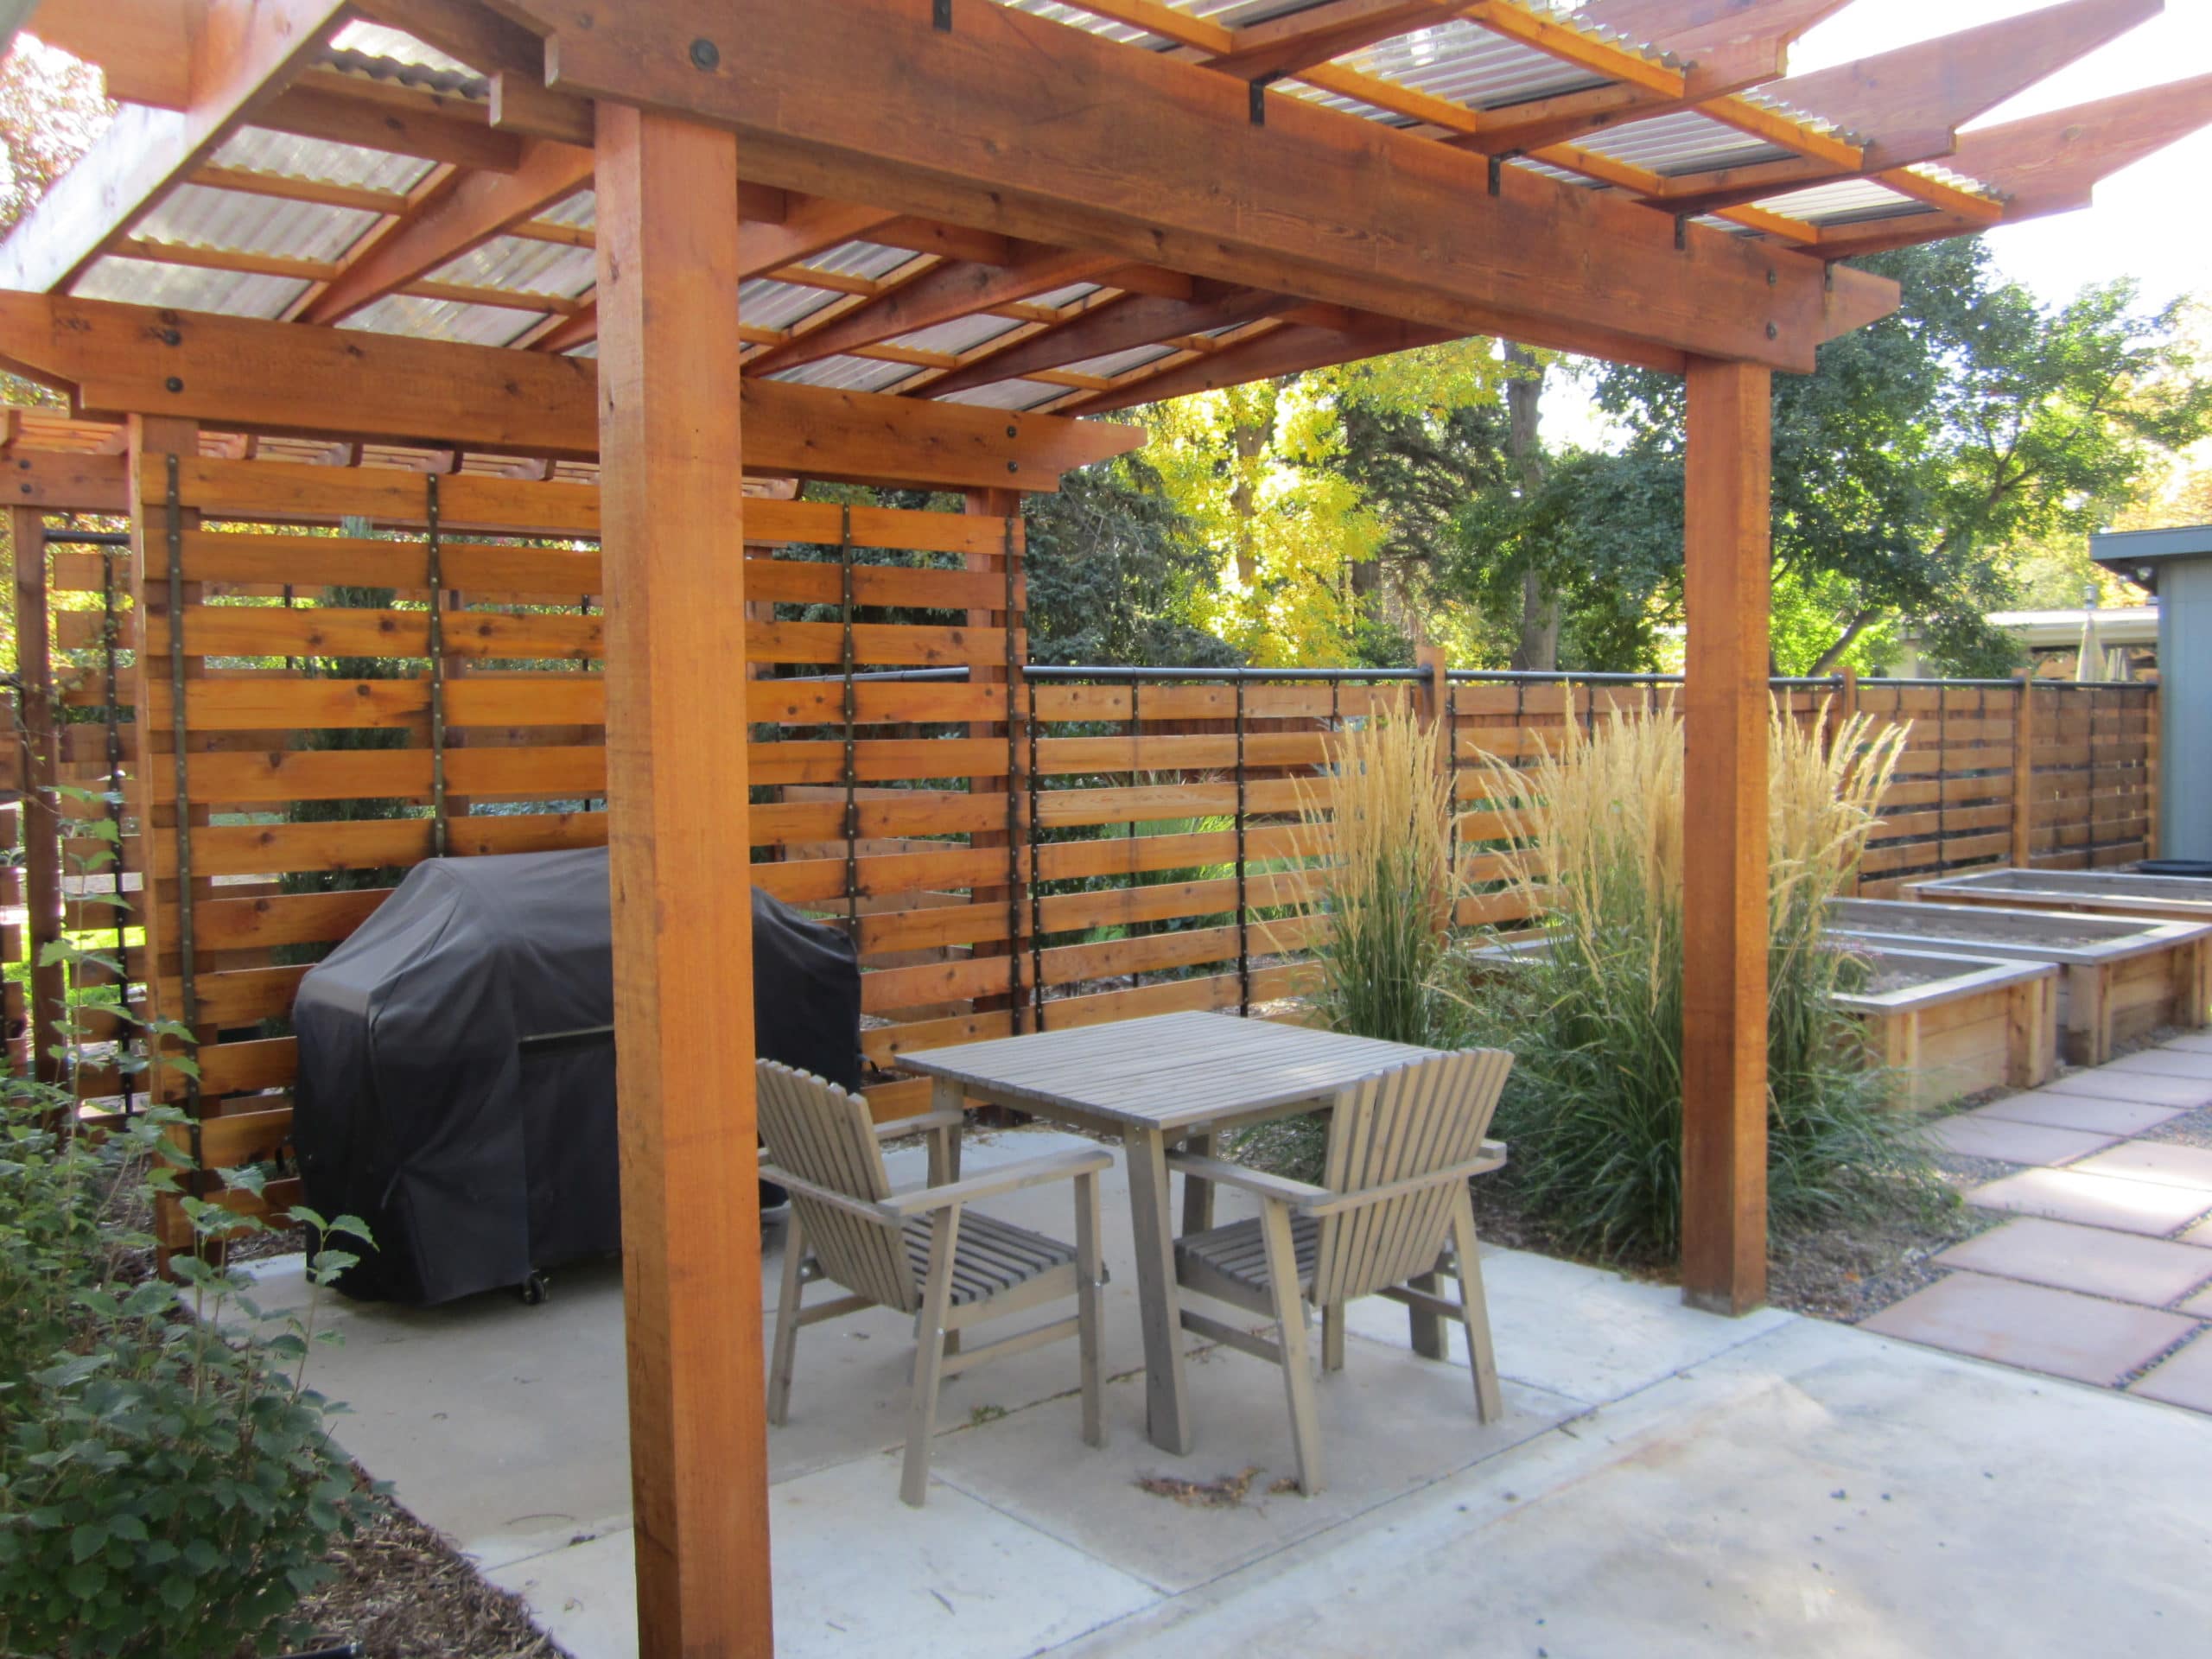 Pergola with dining area. stepping stone path to raised garden beds surrounded by pea gravel and mulch with bushes and plants.